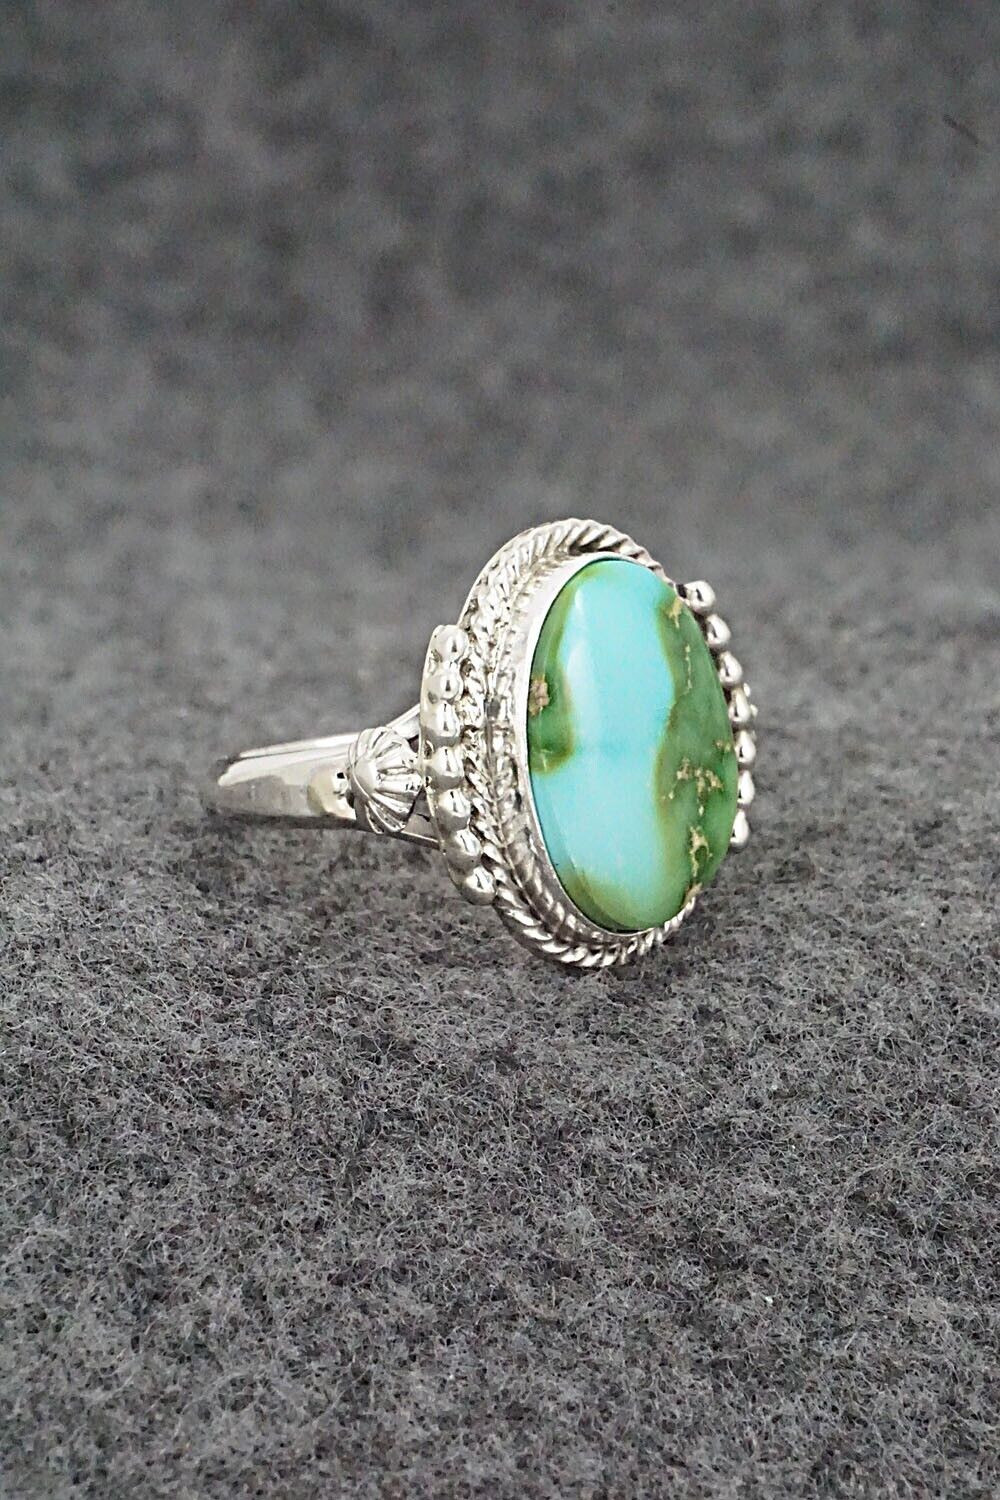 Turquoise & Sterling Silver Ring - Andrew Vandever - Size 8.75